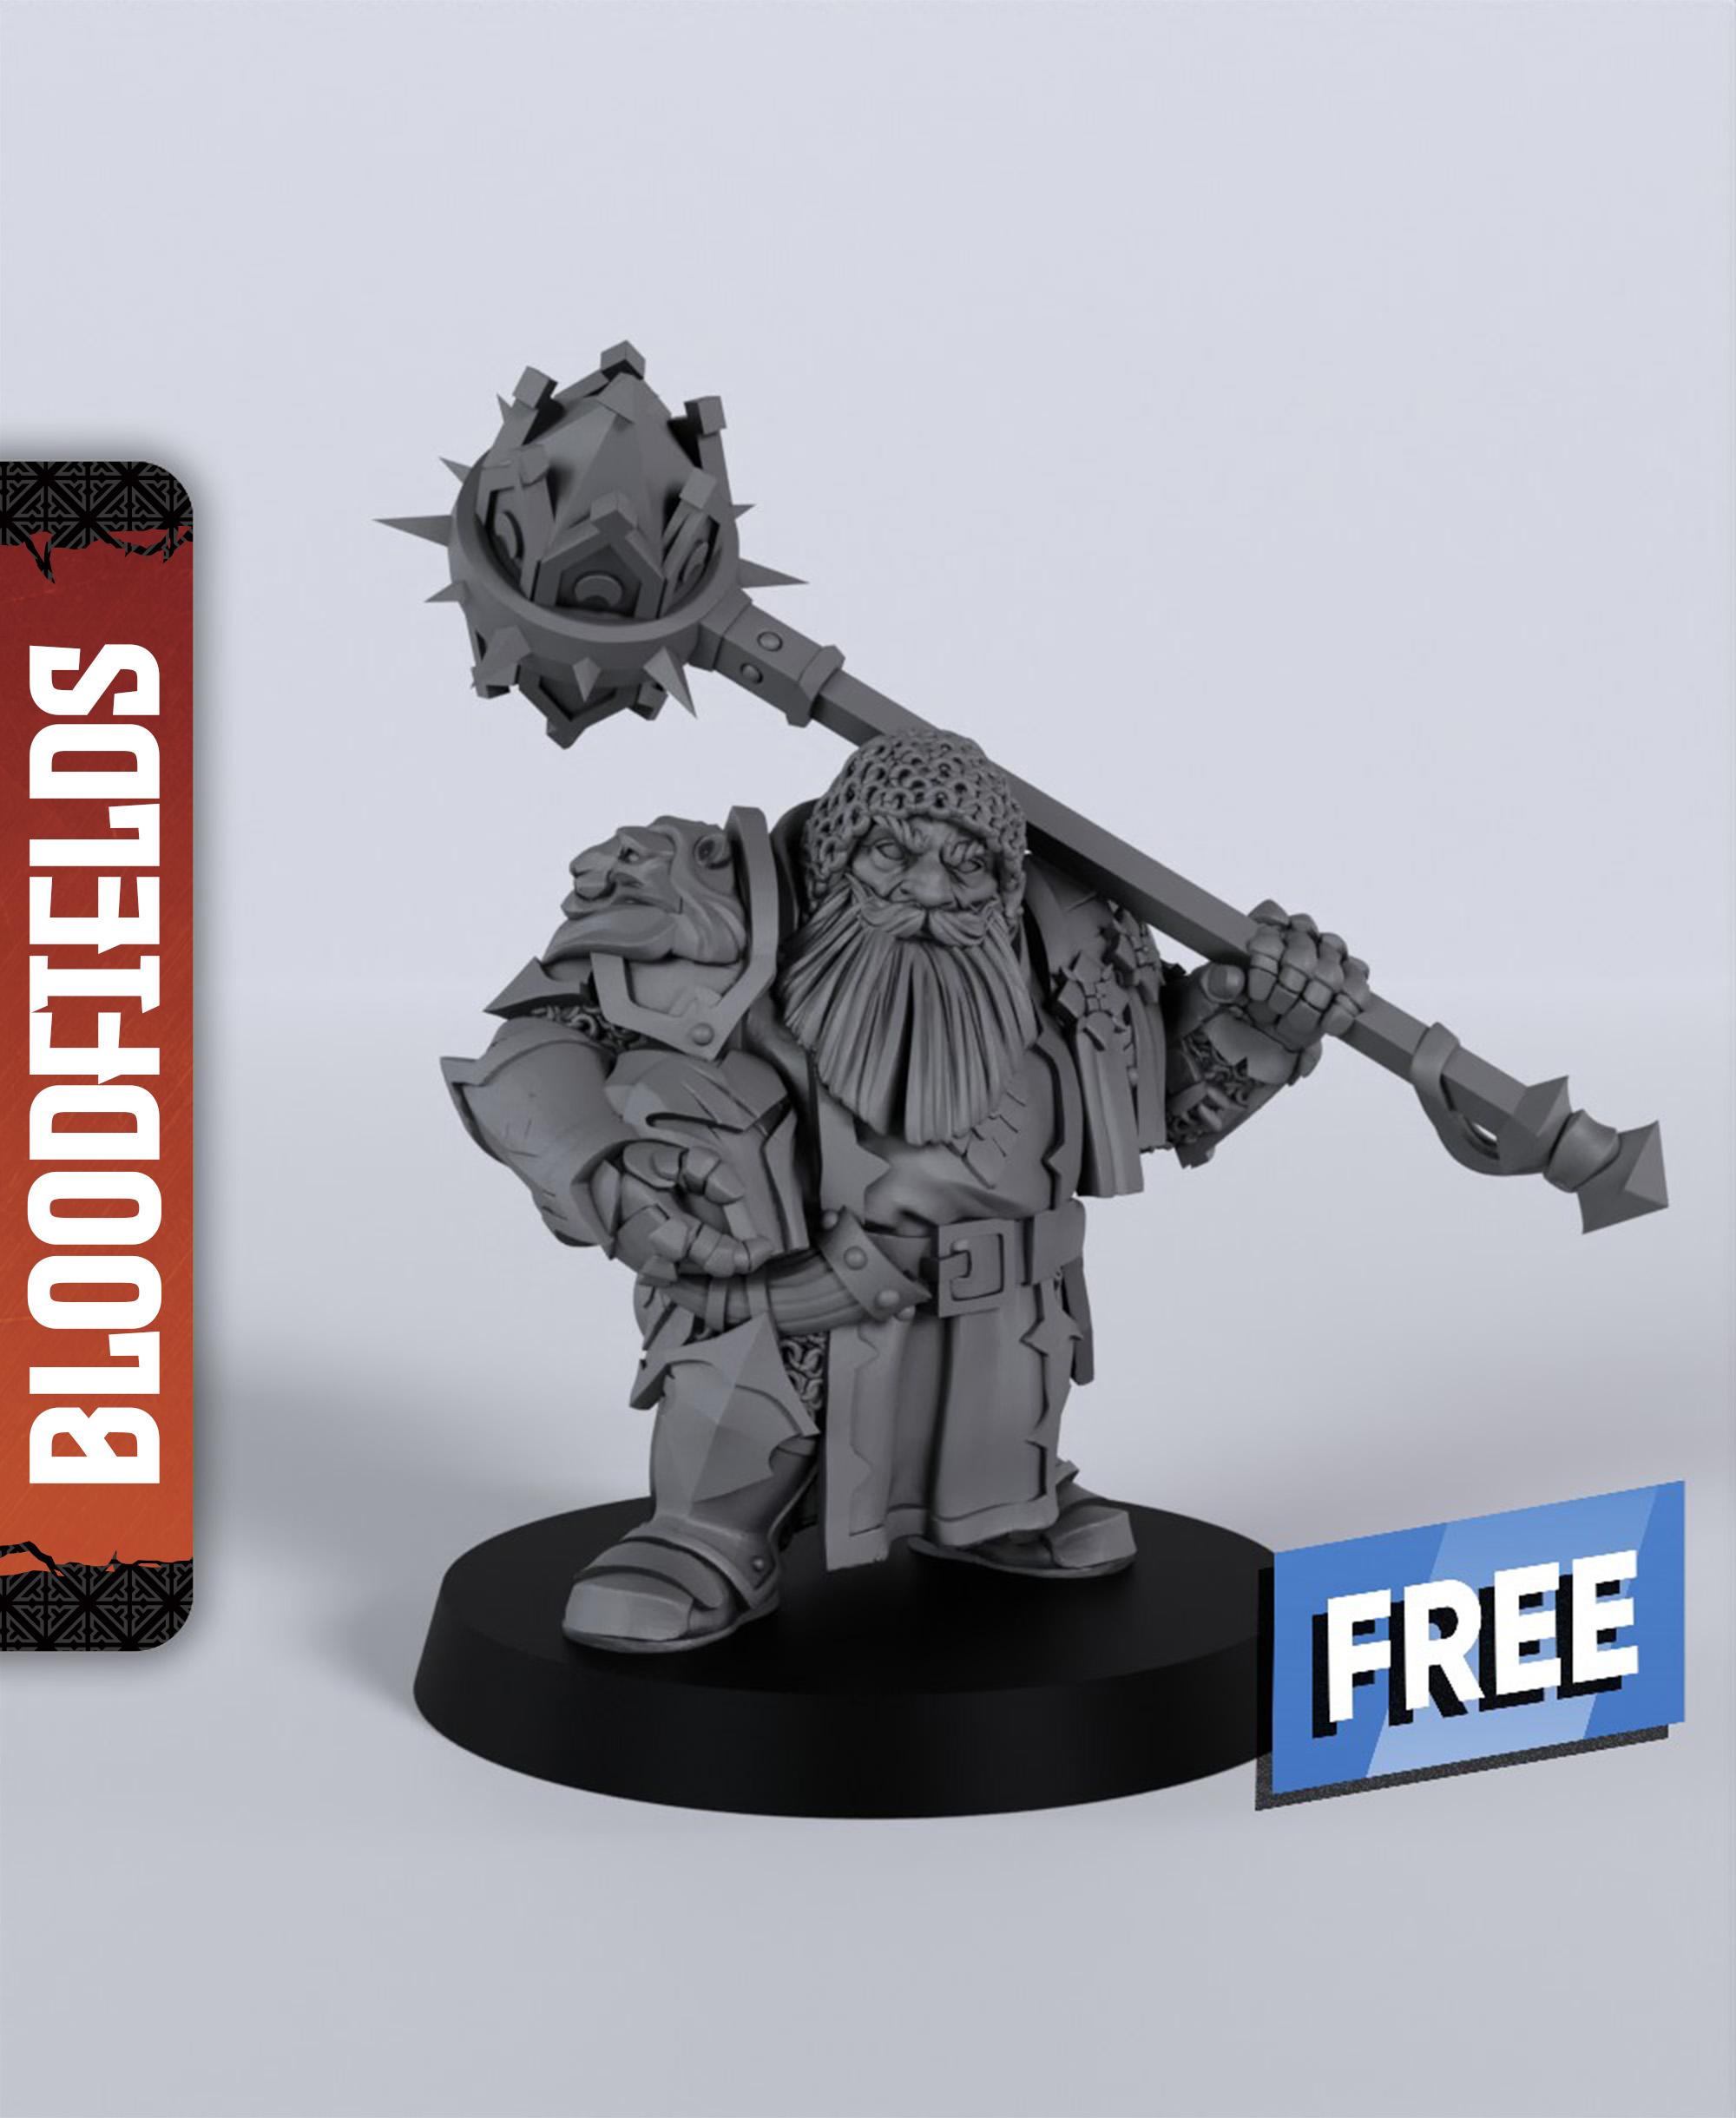 Gorin Thunderclap - With Free Dragon Warhammer - 5e DnD Inspired for RPG and Wargamers 3d model